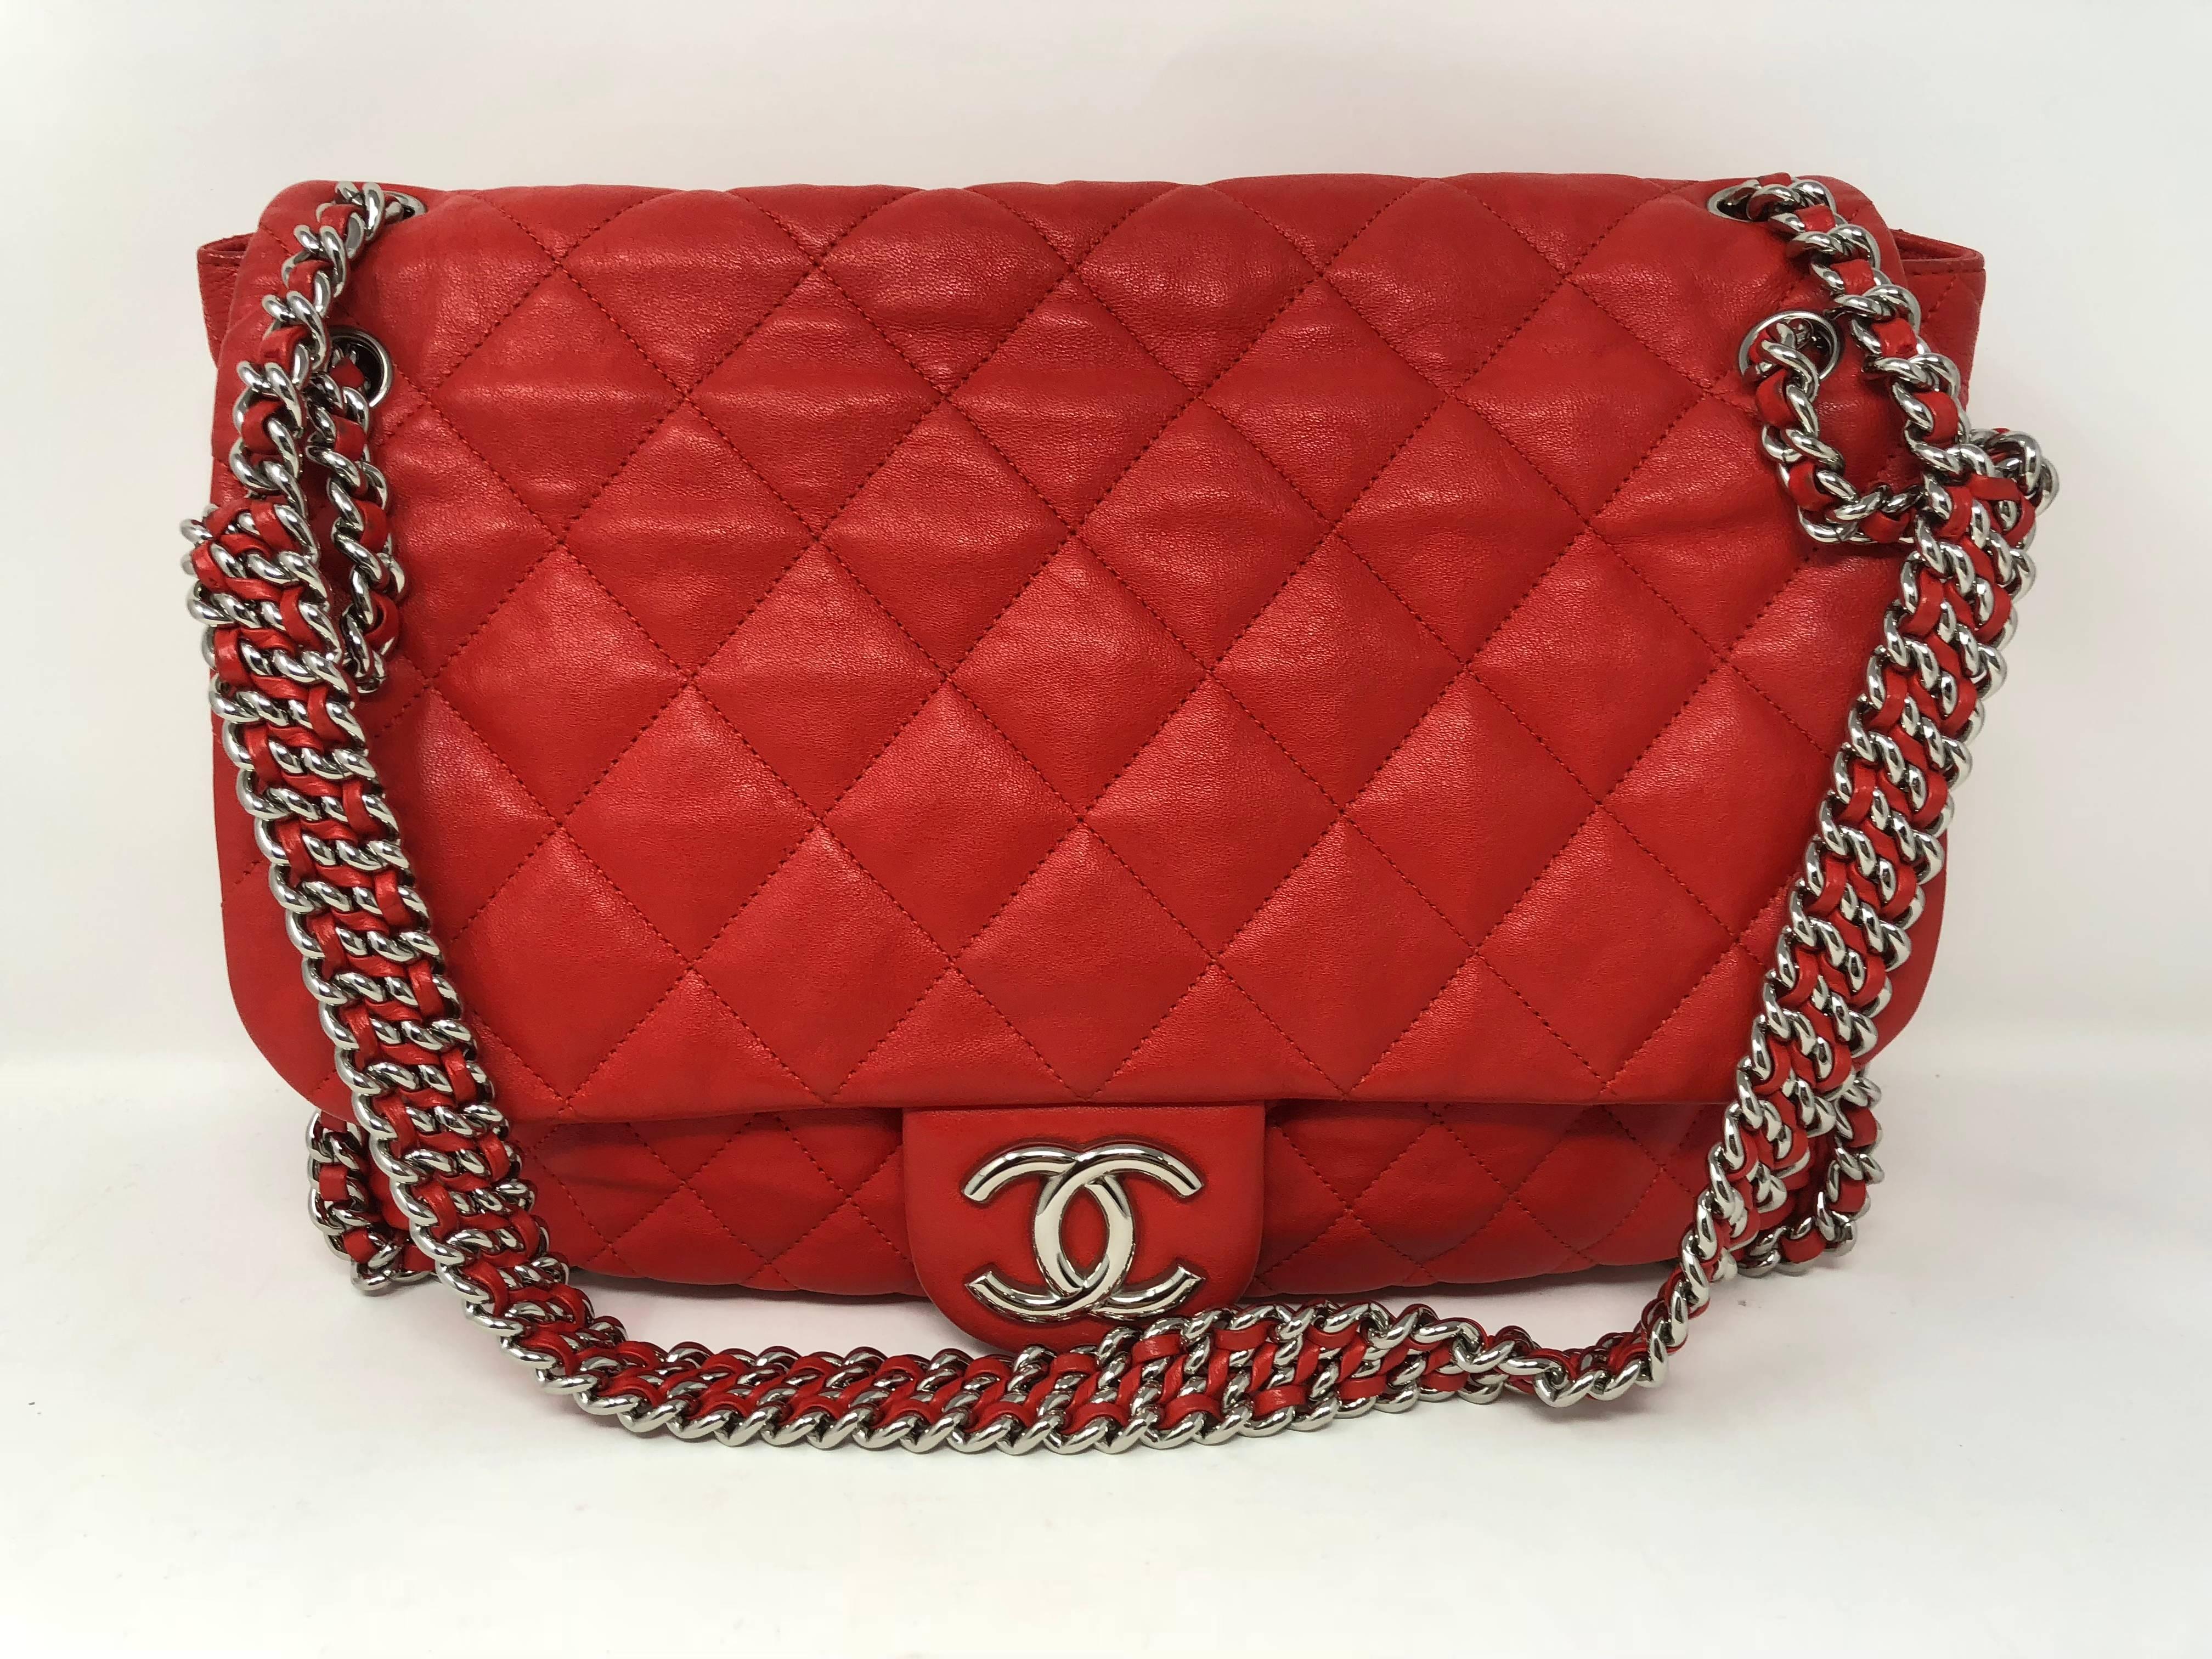 Chanel Red Leather Chain Around Bag with silver hardware. Maxi Chain Around Flap shoulder bag has a double chain strap. 